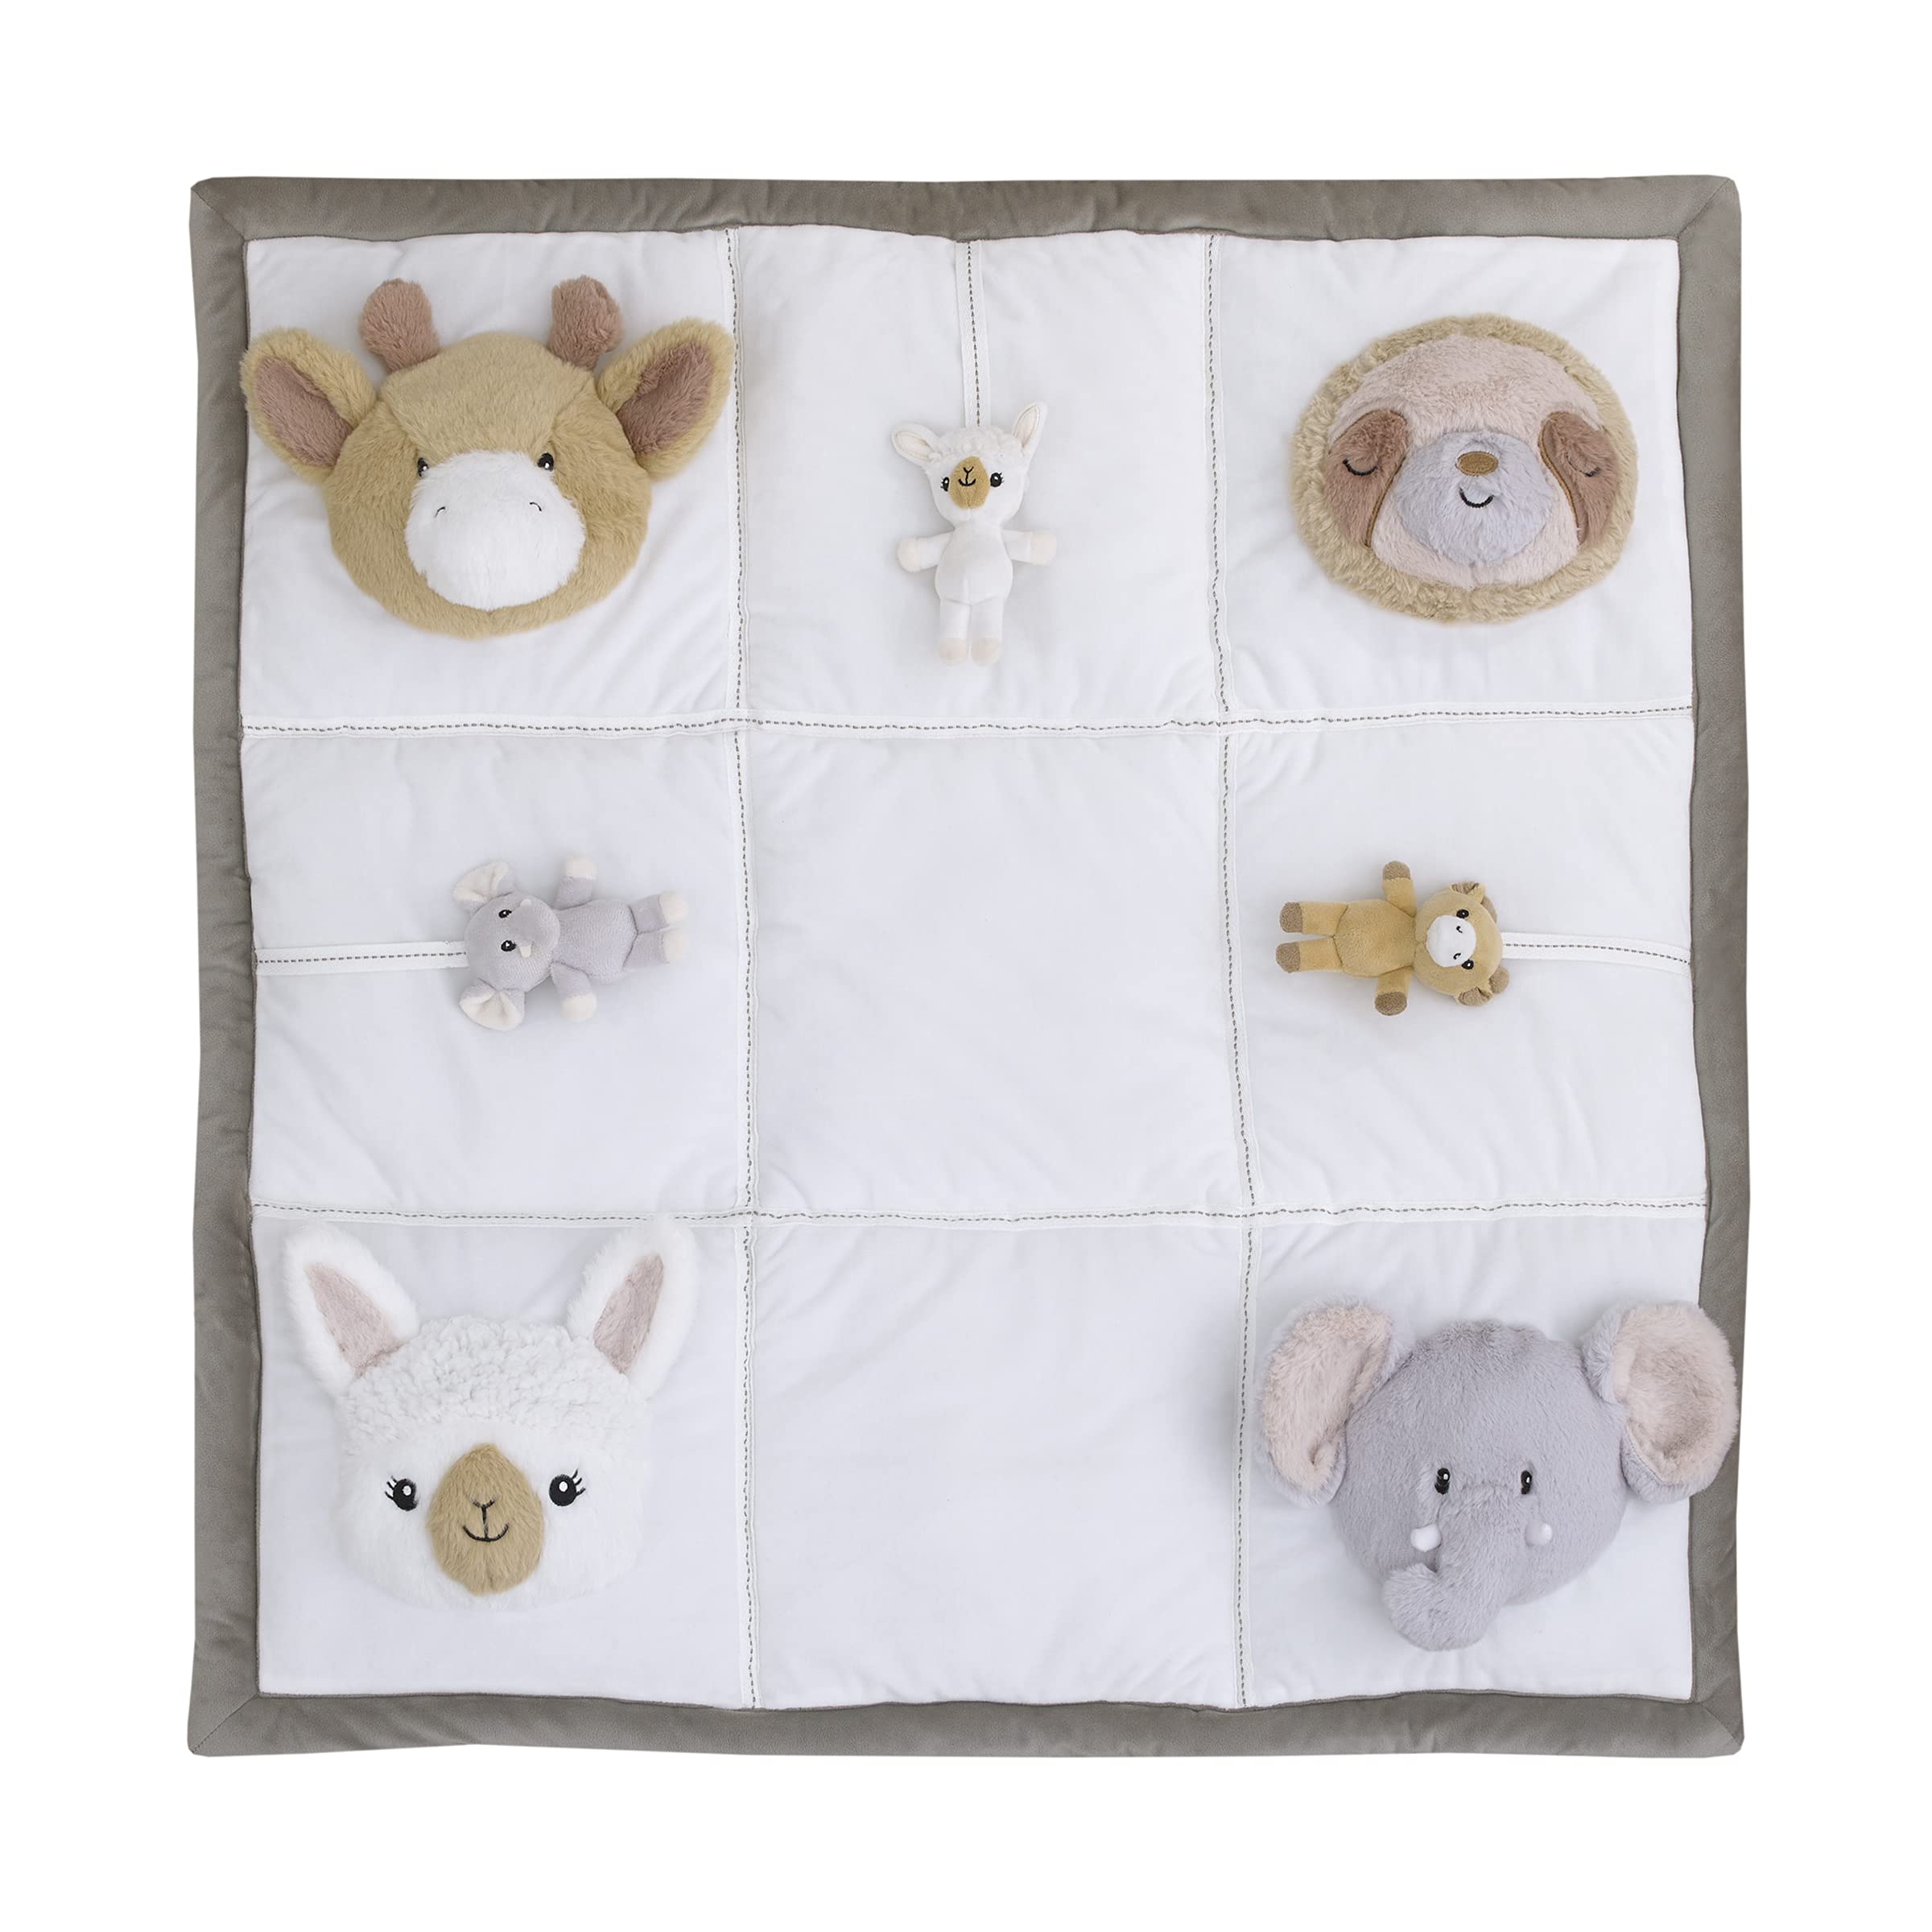 NoJo Playful Pals White, Tan, & Gray Four 3D Animals with Crinkle Plush Tummy Time Play Mat - Sloth, Llama, Elephant, & Giraffe,